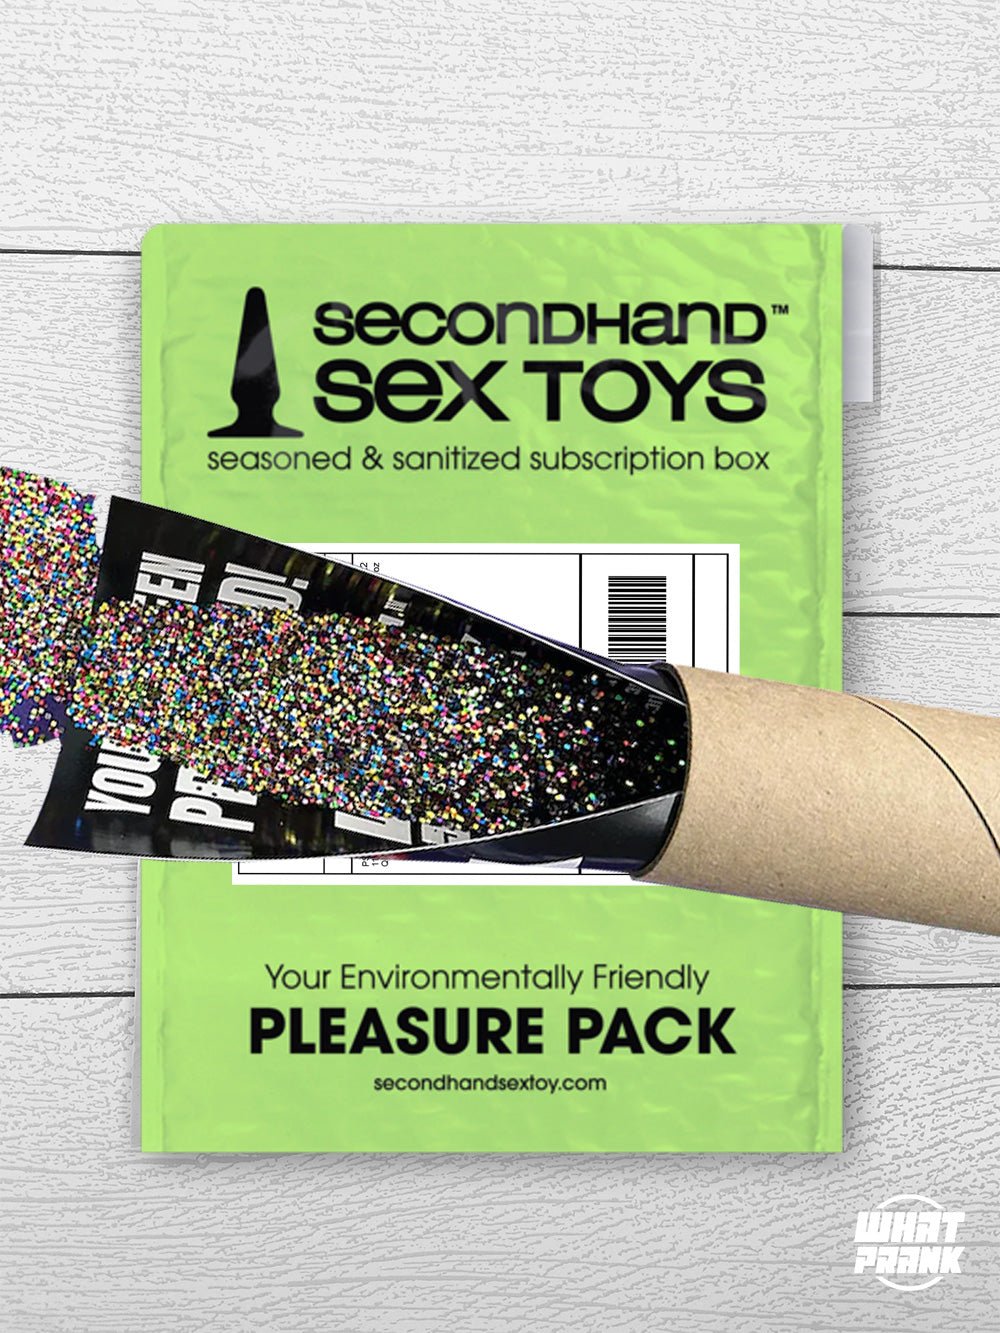 Secondhand Sex Toys Mail Prank picture